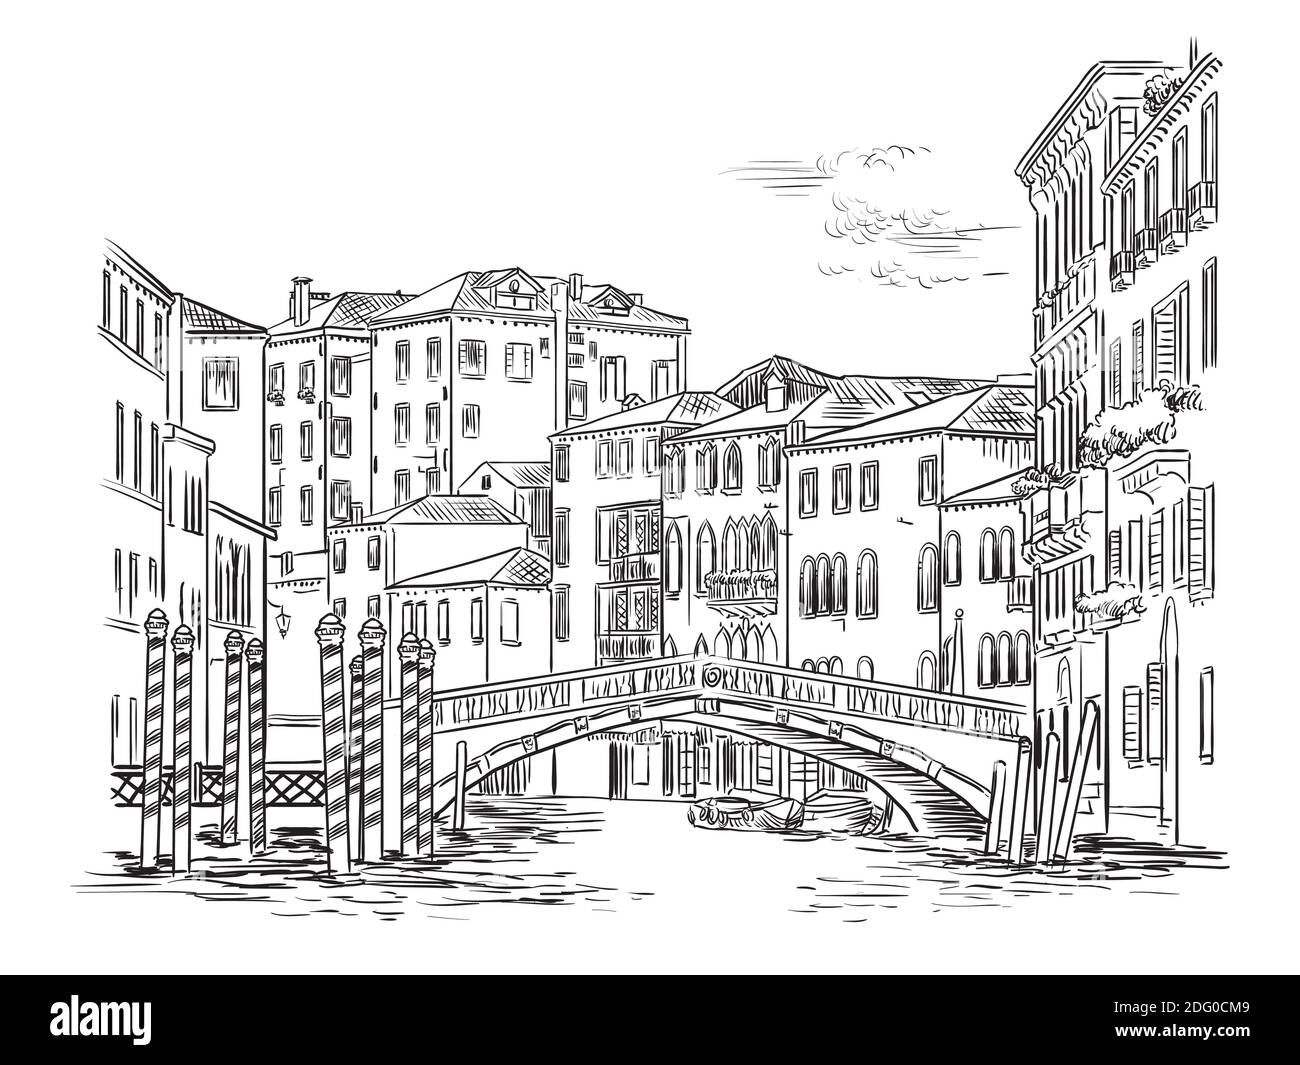 Vector hand drawing illustration of bridge on canal in Venice. Venice cityscape hand drawn sketch in black color isolated on white background. Travel Stock Vector